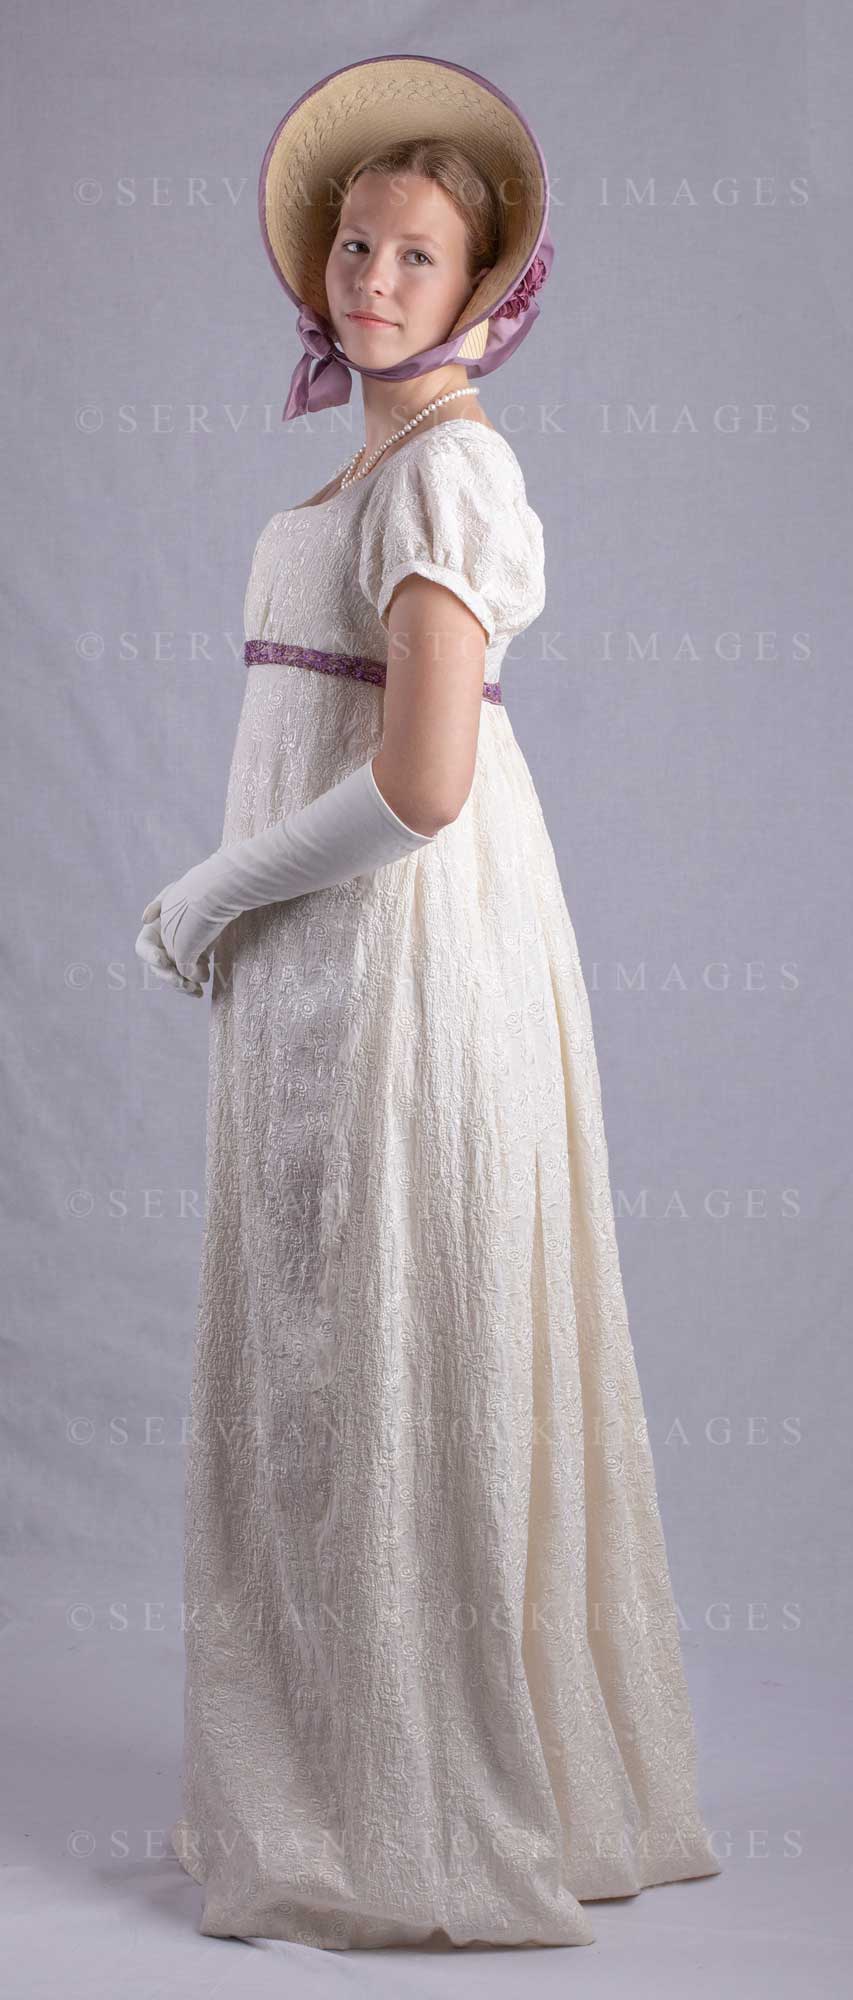 Regency woman in a cream embroidered dress and long gloves (Skye 0035)